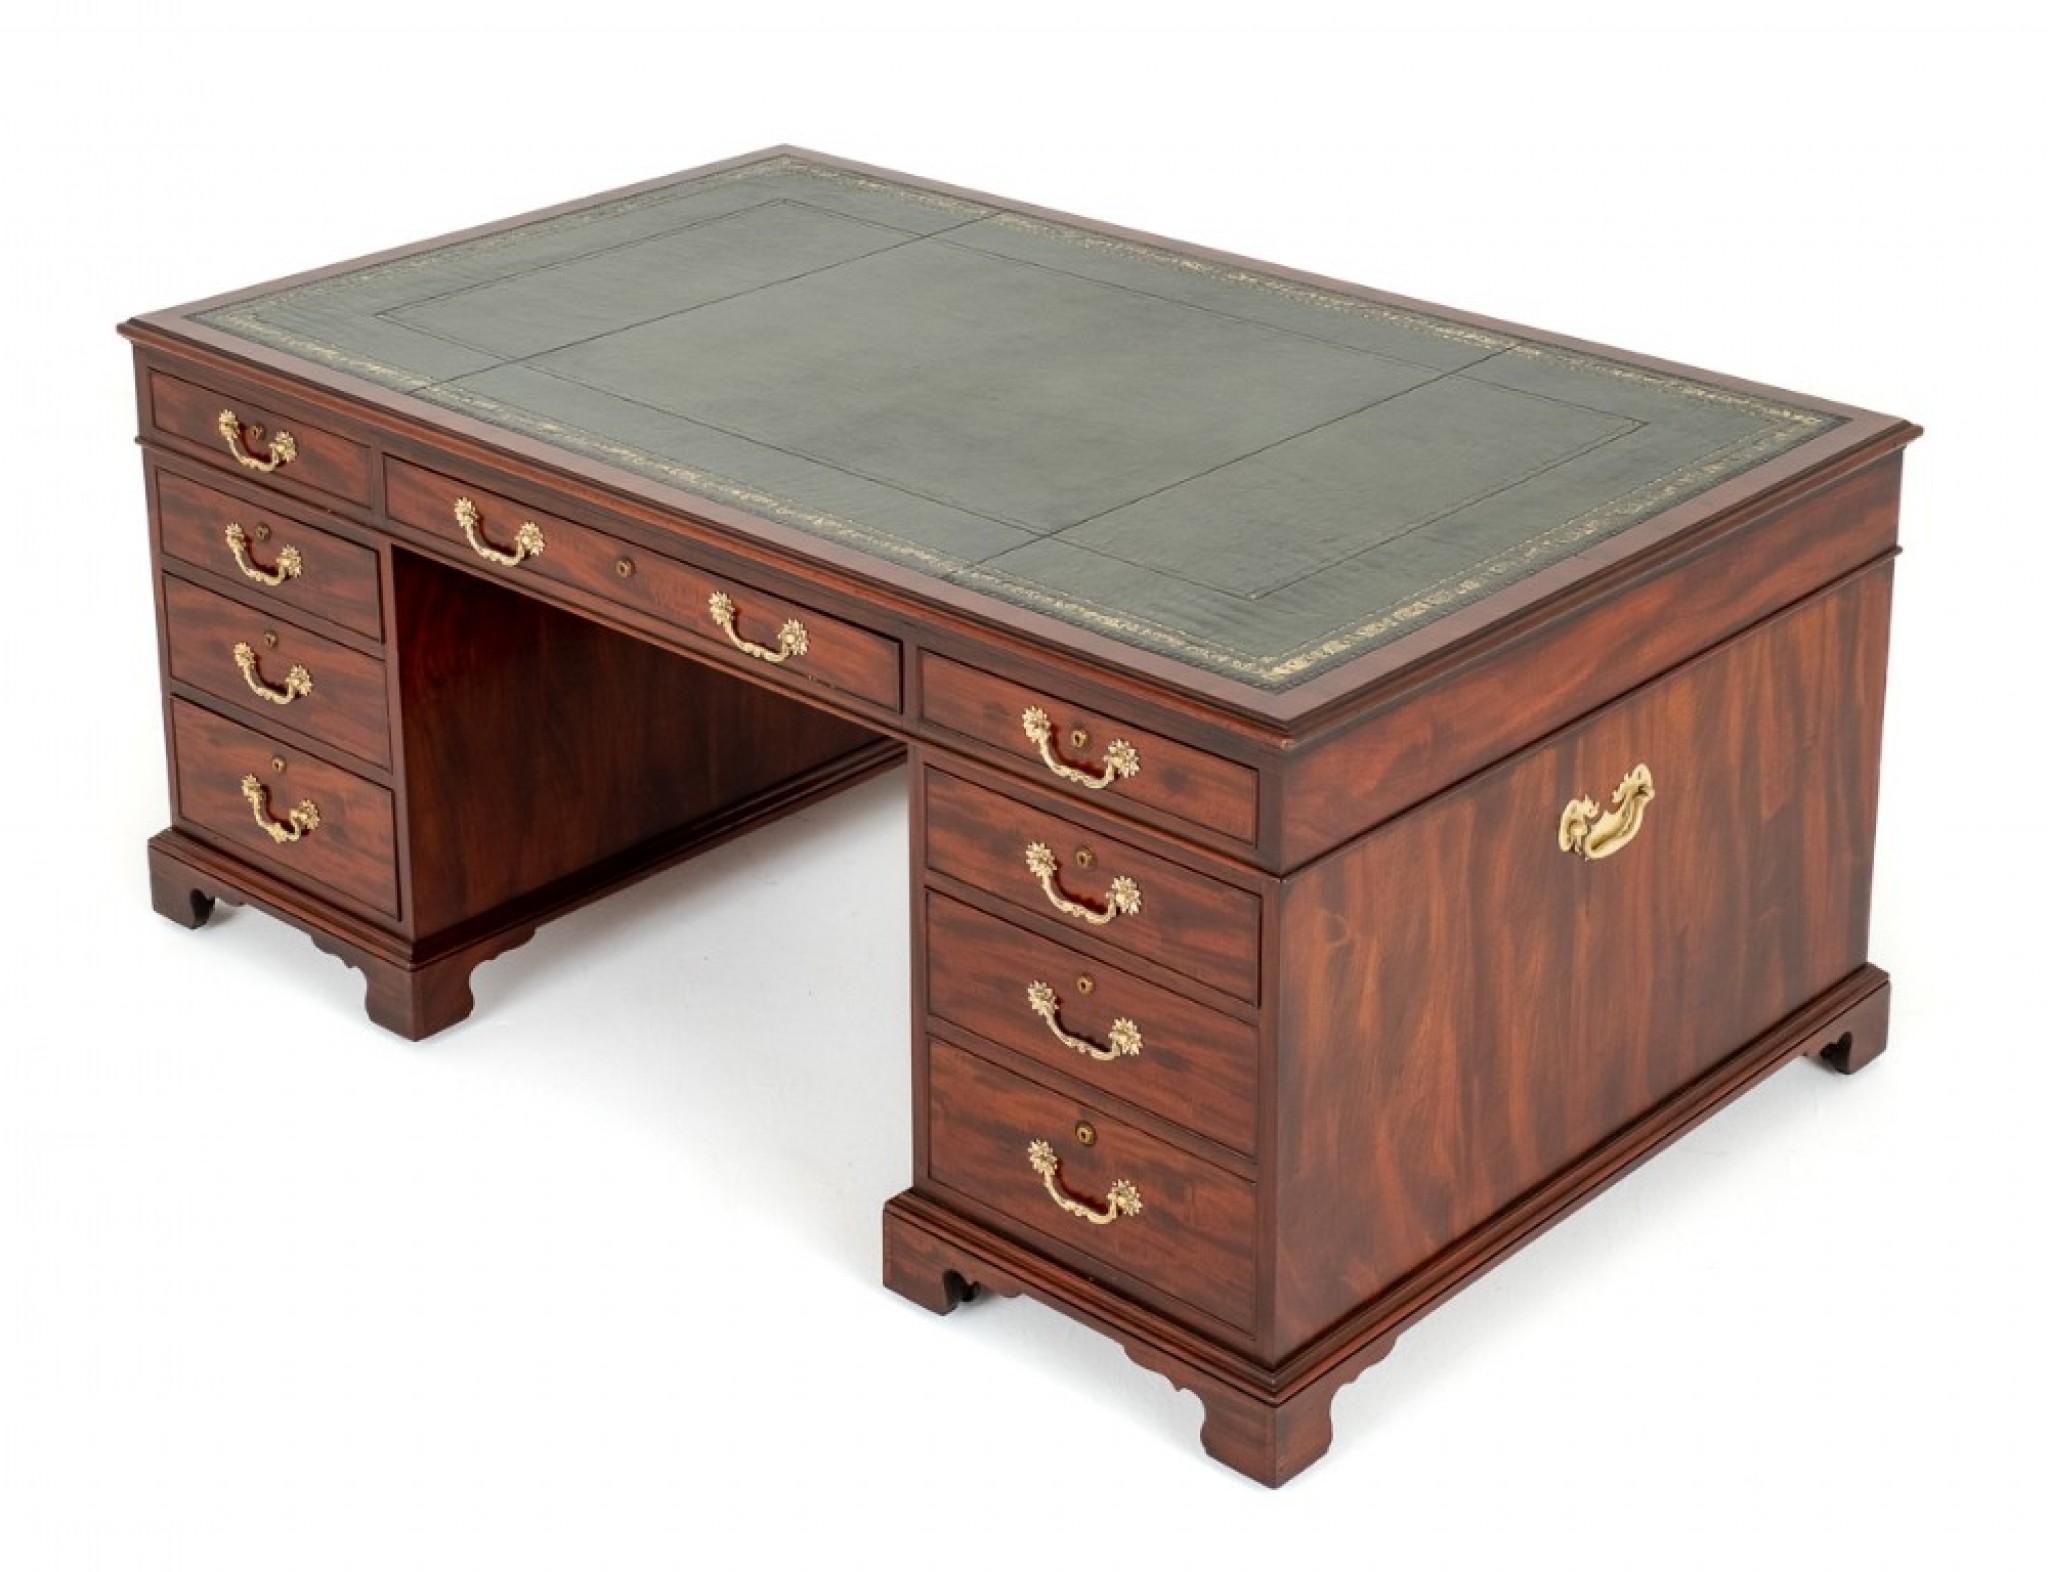 Fabulous 18 Drawer Regency Mahogany Partners Desk.
This Excellent Quality Partners Desk has 9 Oak Lined Drawers to Either Side.
Regency Period
The Drawers Feature Brass Swan Neck Handles and Bramah Locks.
(Joseph Bramah (13 April 1748[1] – 9